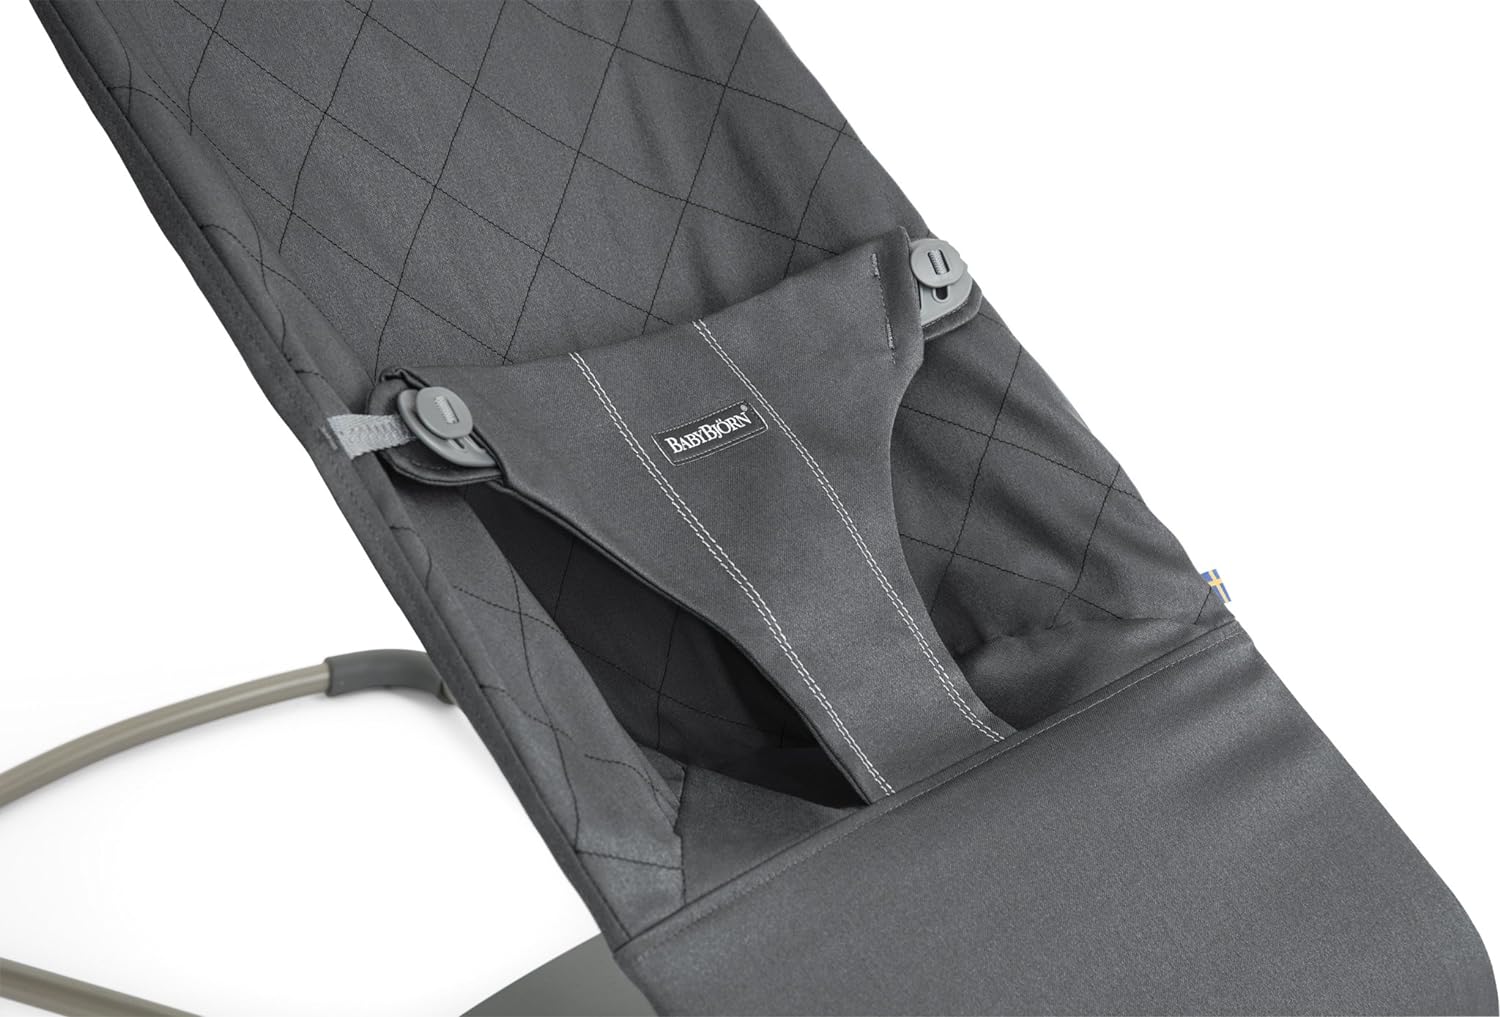 BabyBjorn Bouncer Bliss, Woven, Classic quilt, Anthracite